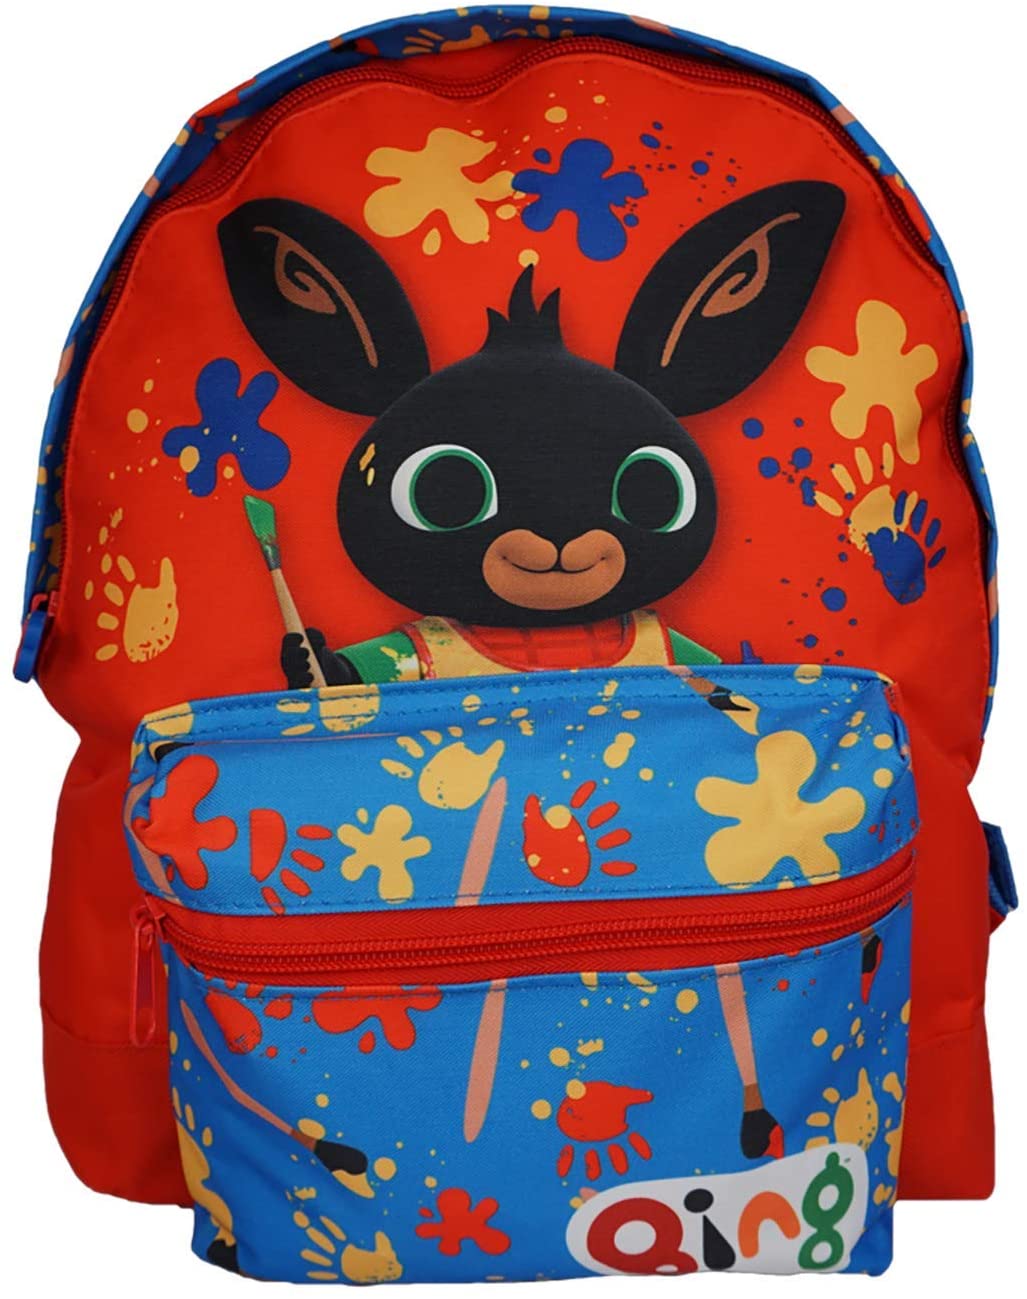 Bing Paint Splat Official Character Roxy Backpack- Childrens School ...